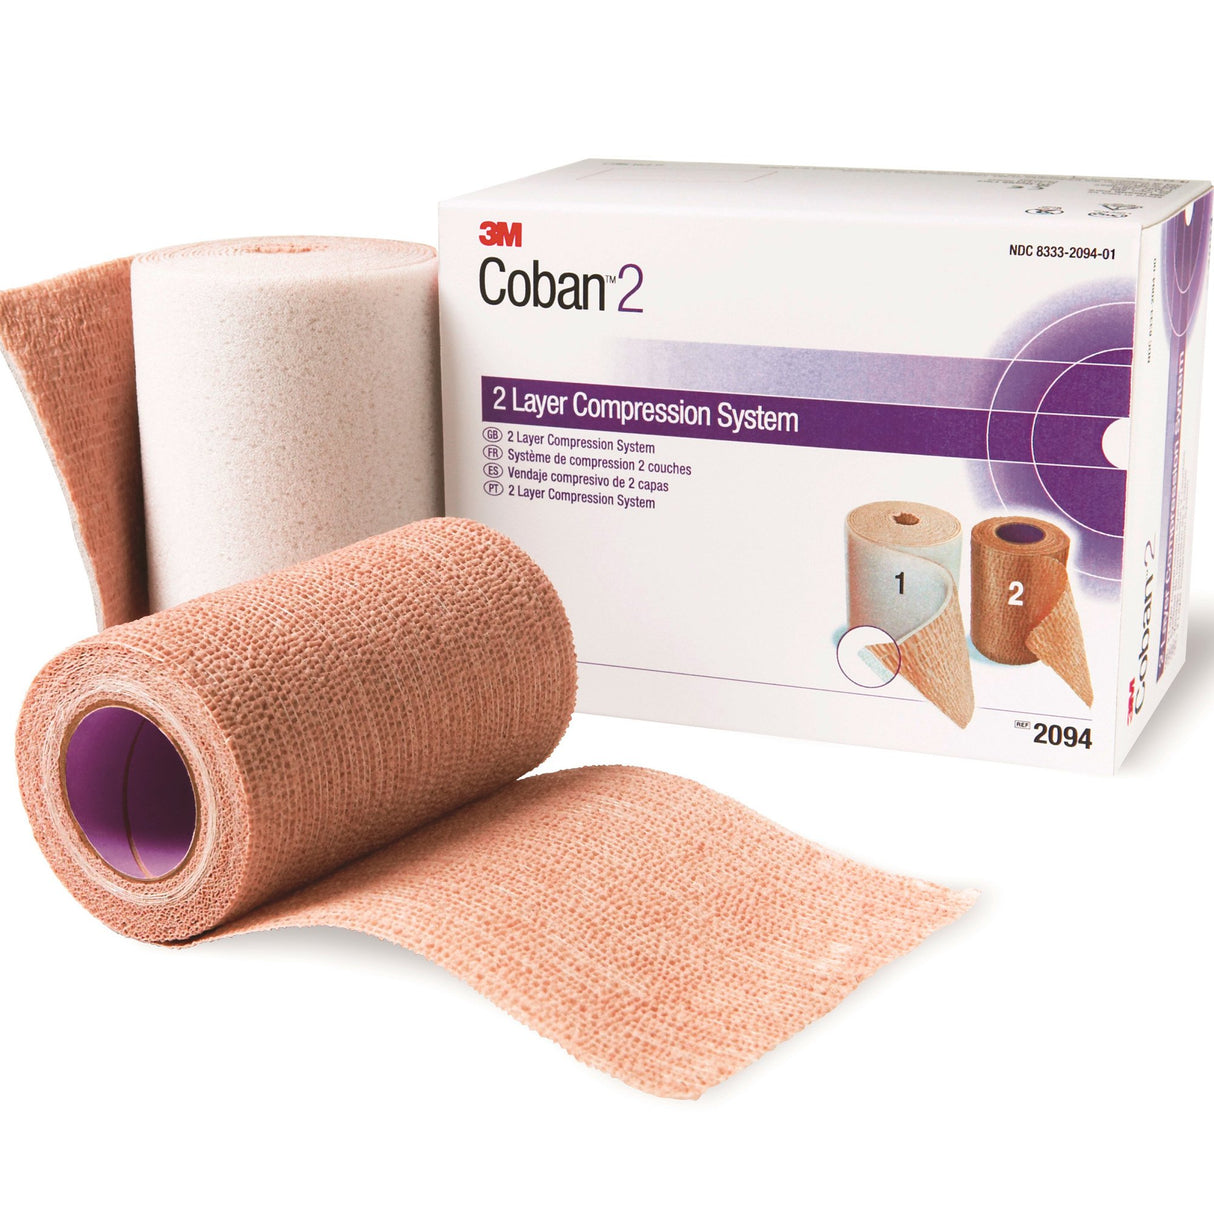 3M™ Coban™ 2 Self-adherent / Pull On Closure Two-Layer Compression Bandage System